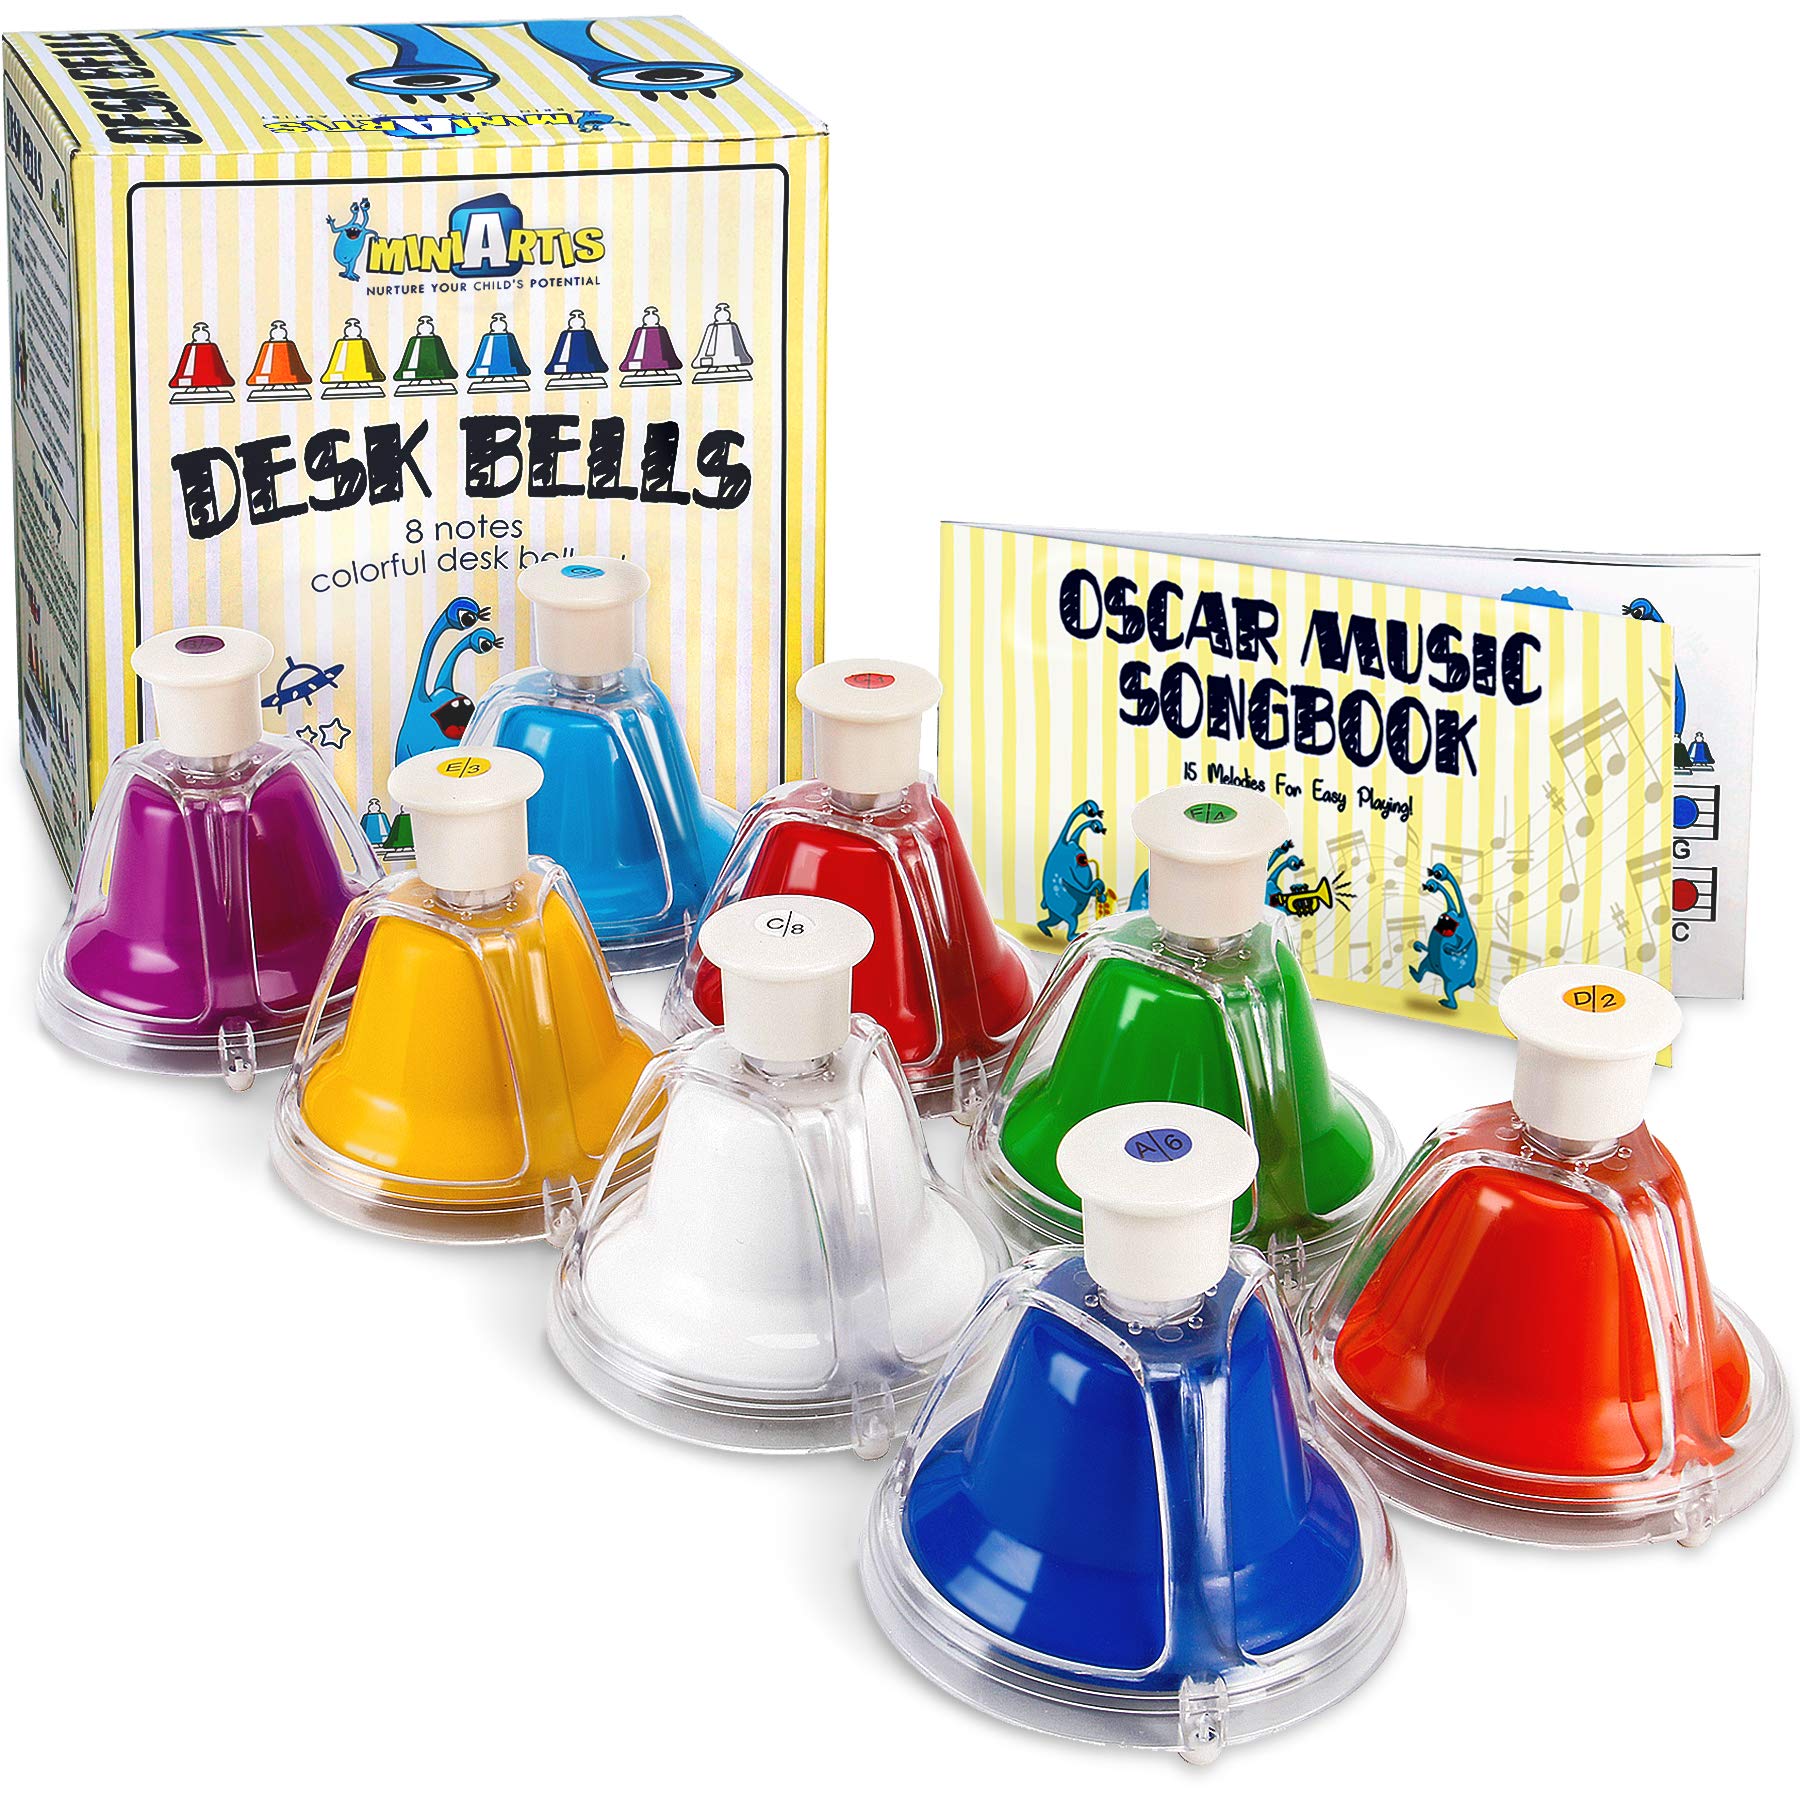 MINIARTIS Desk Bells for Kids | Educational Music Toys for Toddlers 8 Notes Colorful Hand Bells Set | Kids Musical Instrument wi